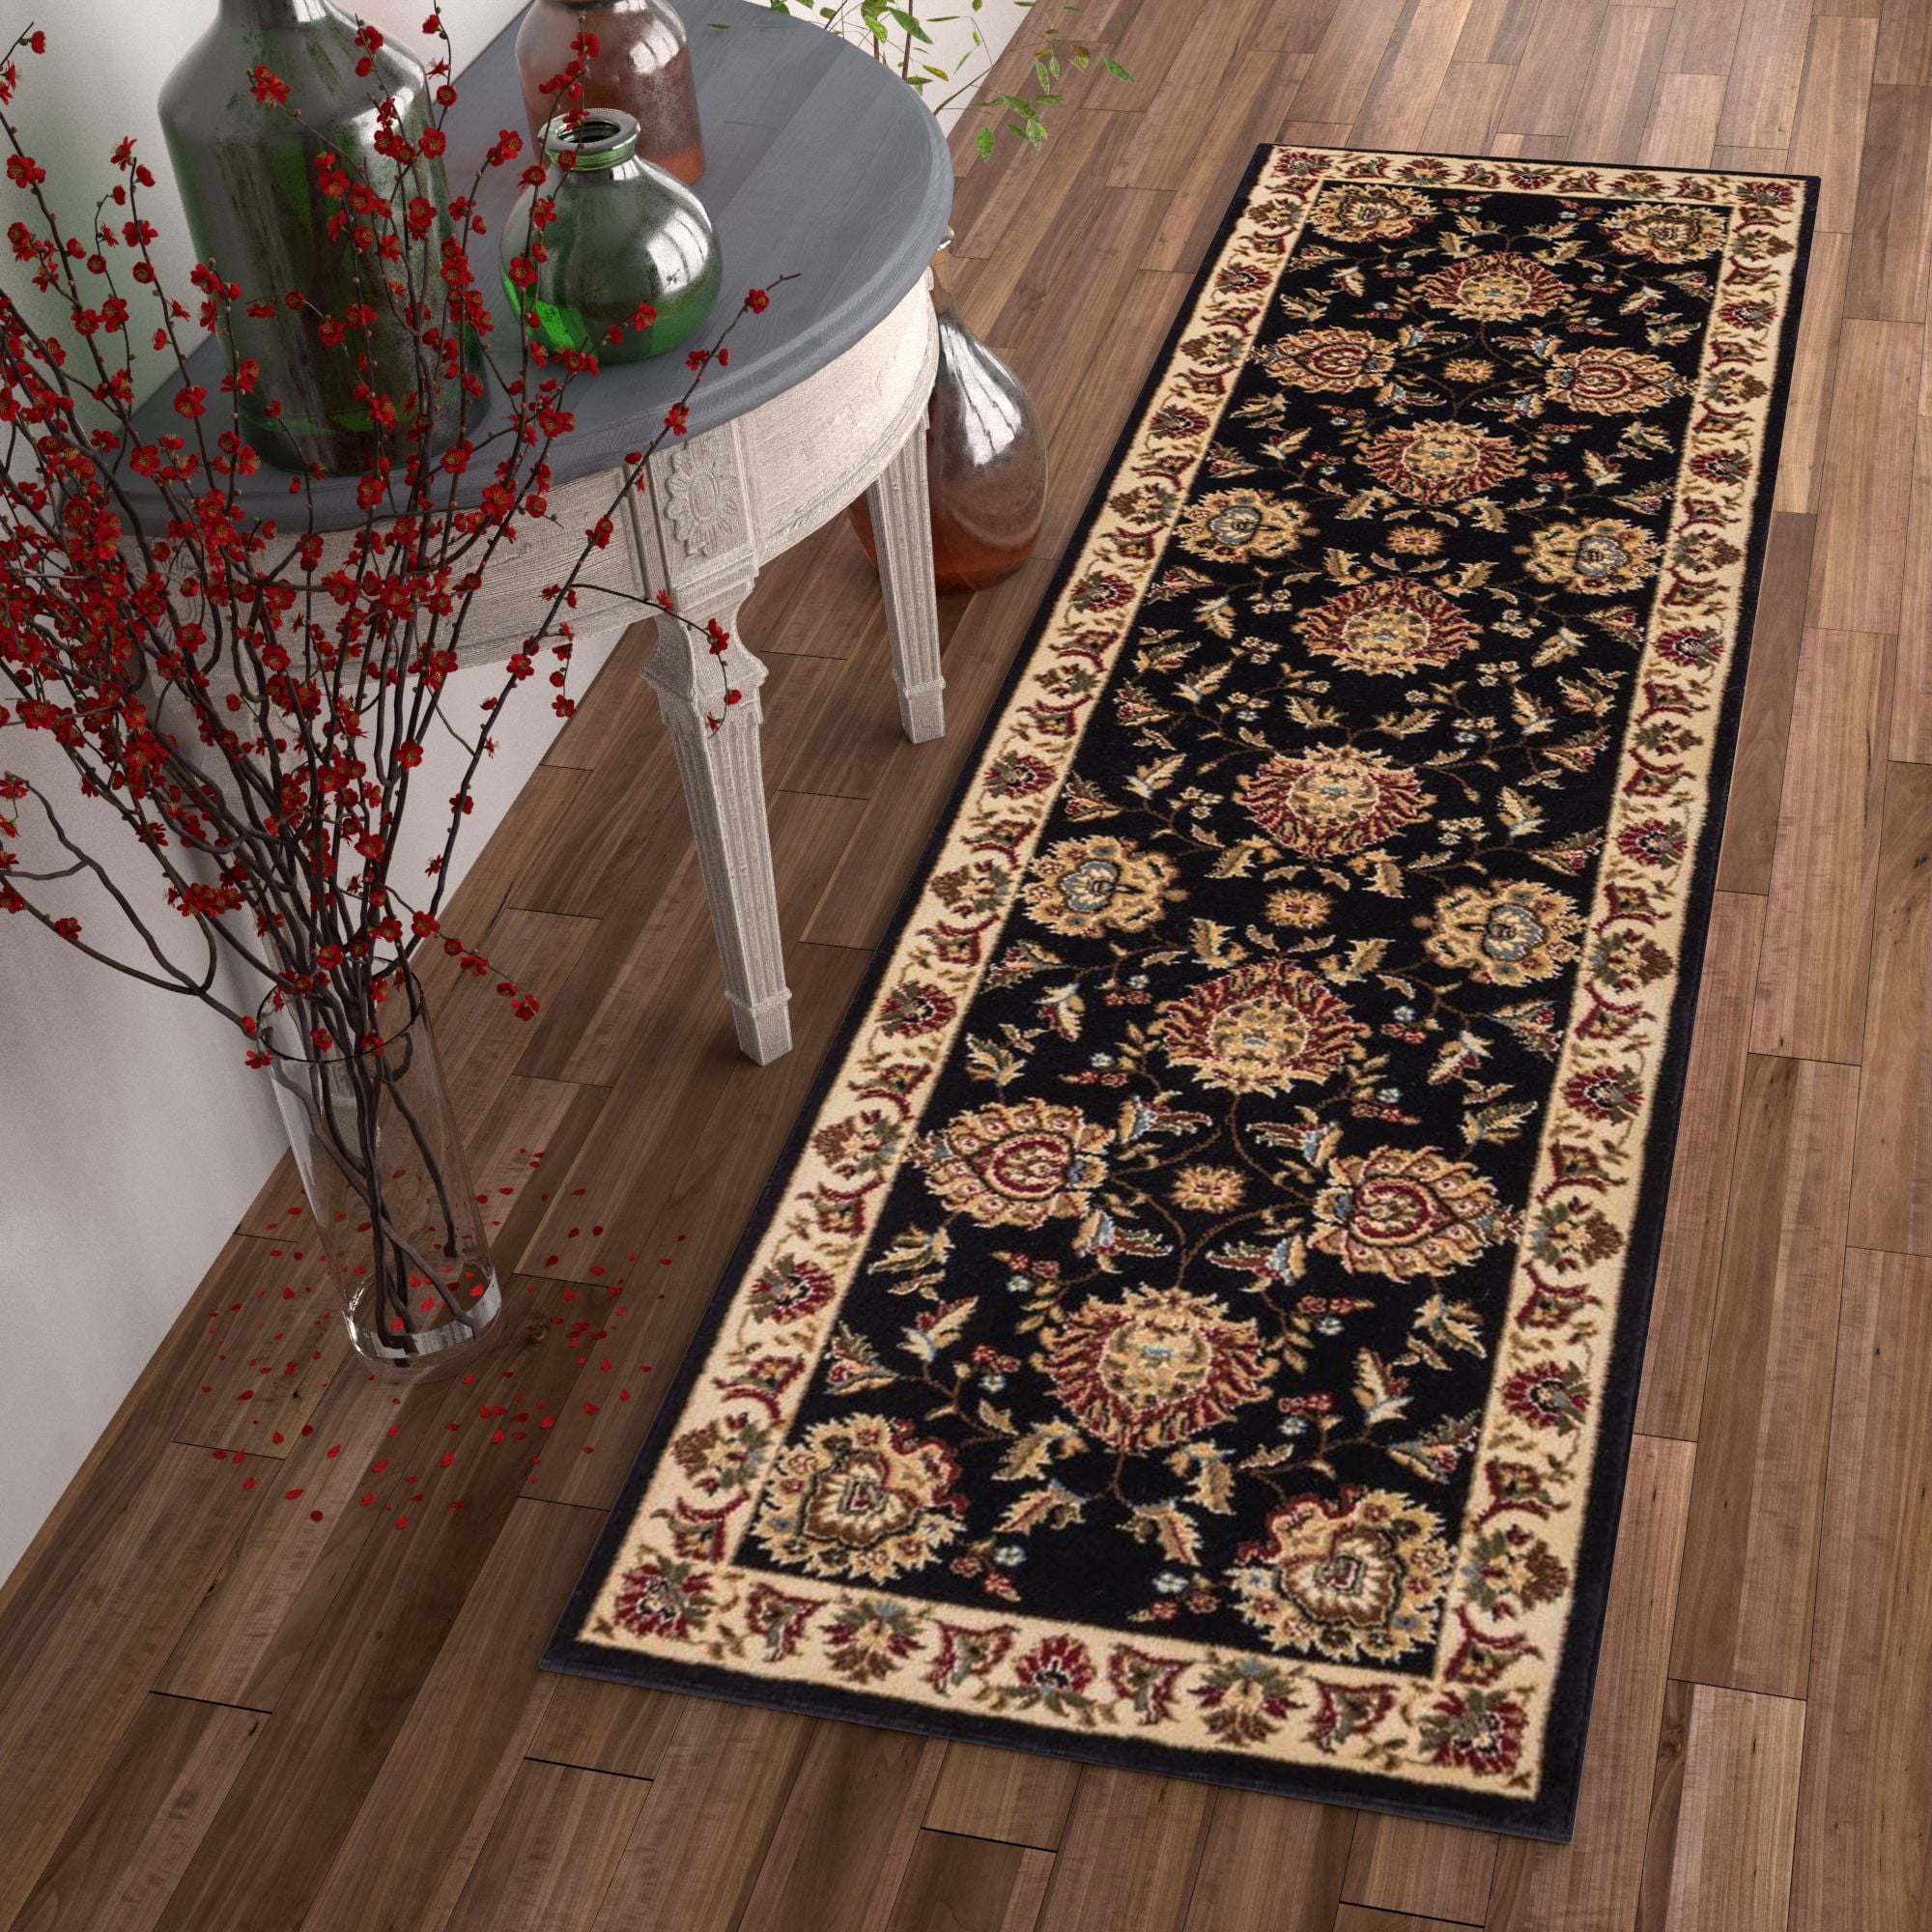 Sultan Sarouk Black Persian Floral Oriental Formal Traditional 4x5 4x6 3'11 x 5'3 Area Rug Easy to Clean Stain Fade Resistant Shed Free Modern Contemporary Thick Soft Plush Living Dining Room Rug 